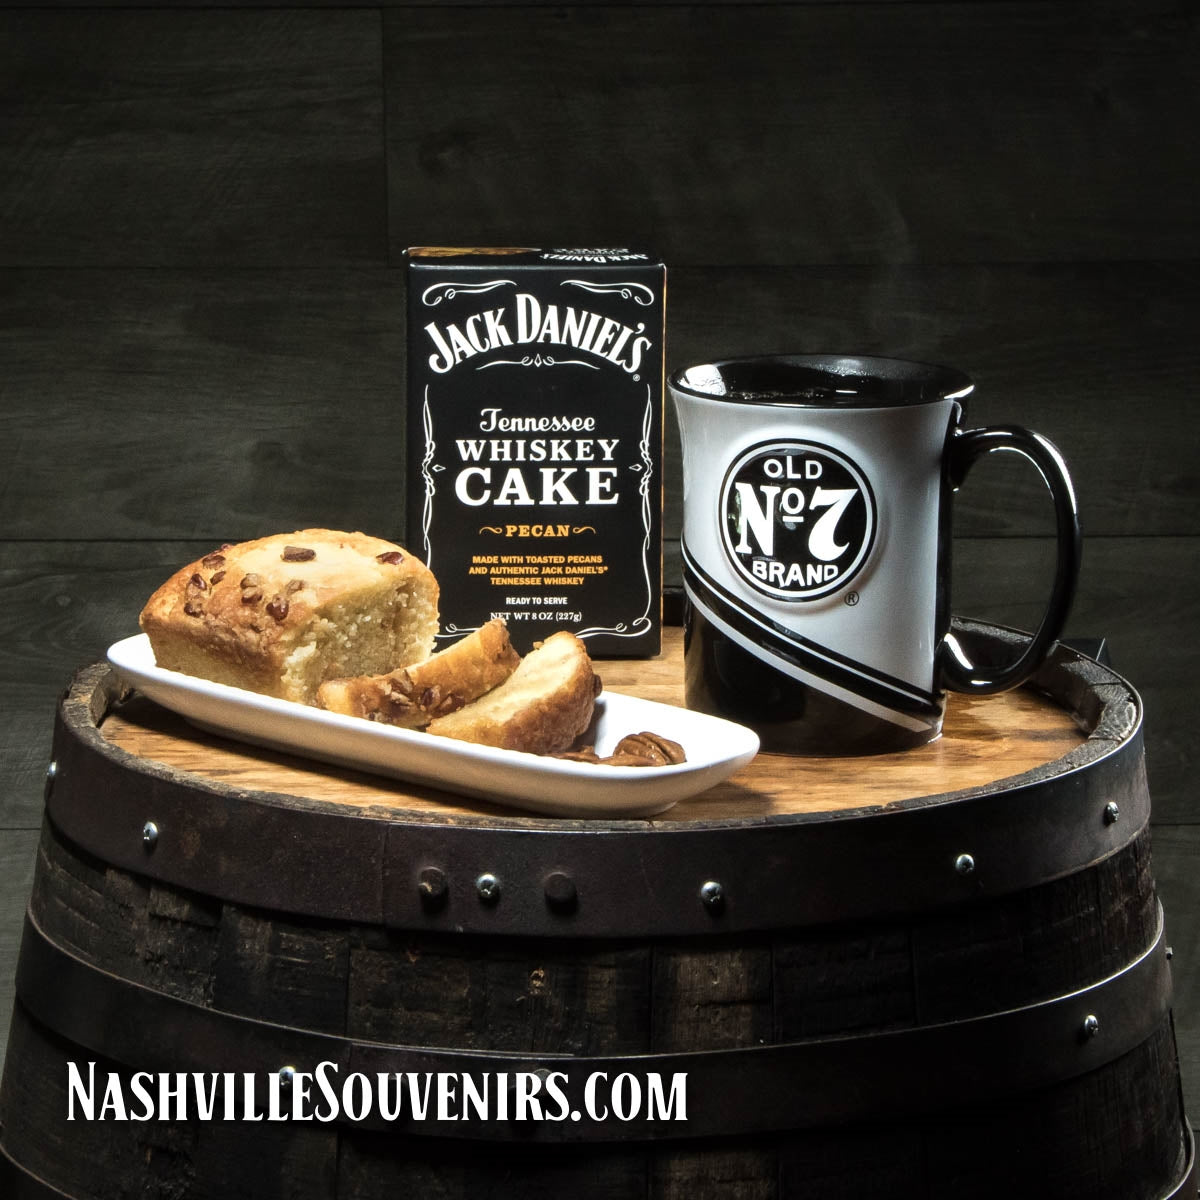 Live large each morning,Start your day with a Jack Daniels Twist Mug and Whiskey Cake Gift Set. Tasty whiskey cake and a great coffee mug for your morning Joe. And get FREE SHIPPING on orders over $75!